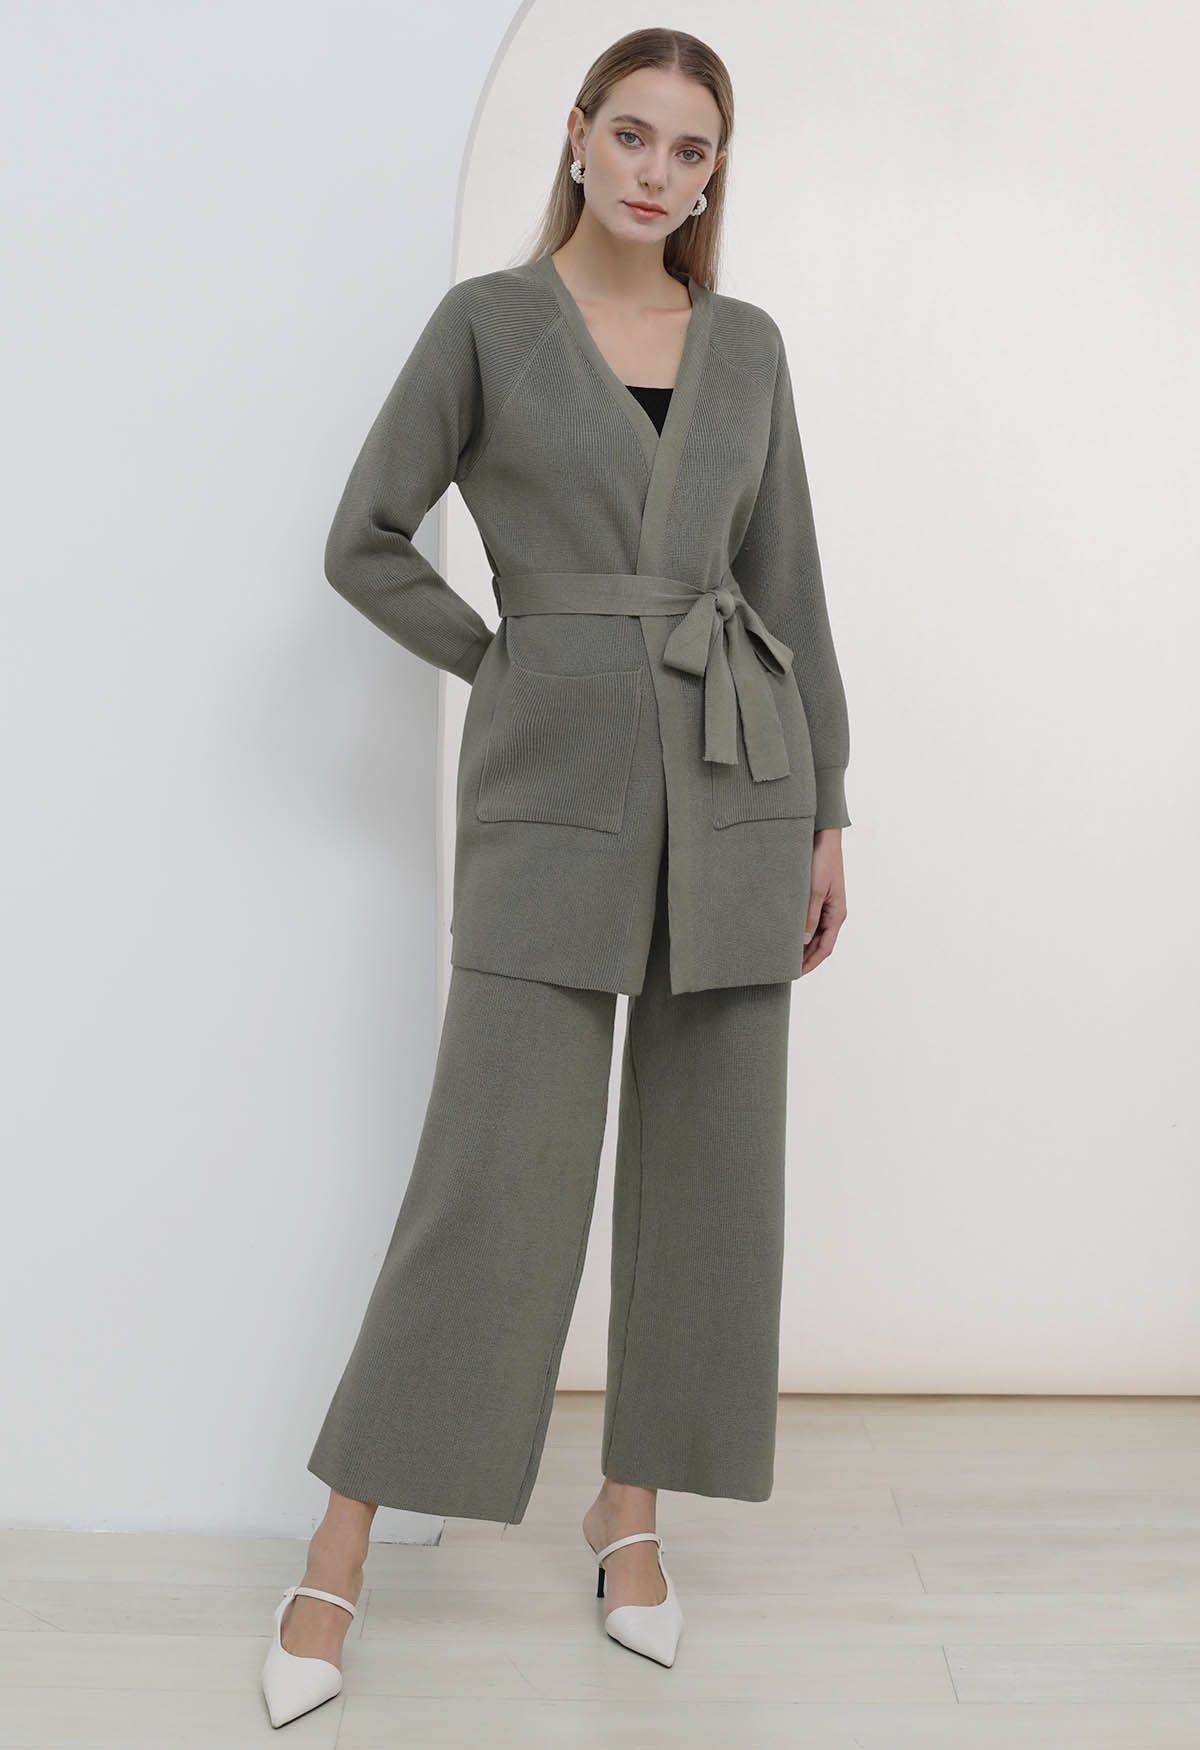 Tie-Waist Knit Cardigan and Pants Set in Sage